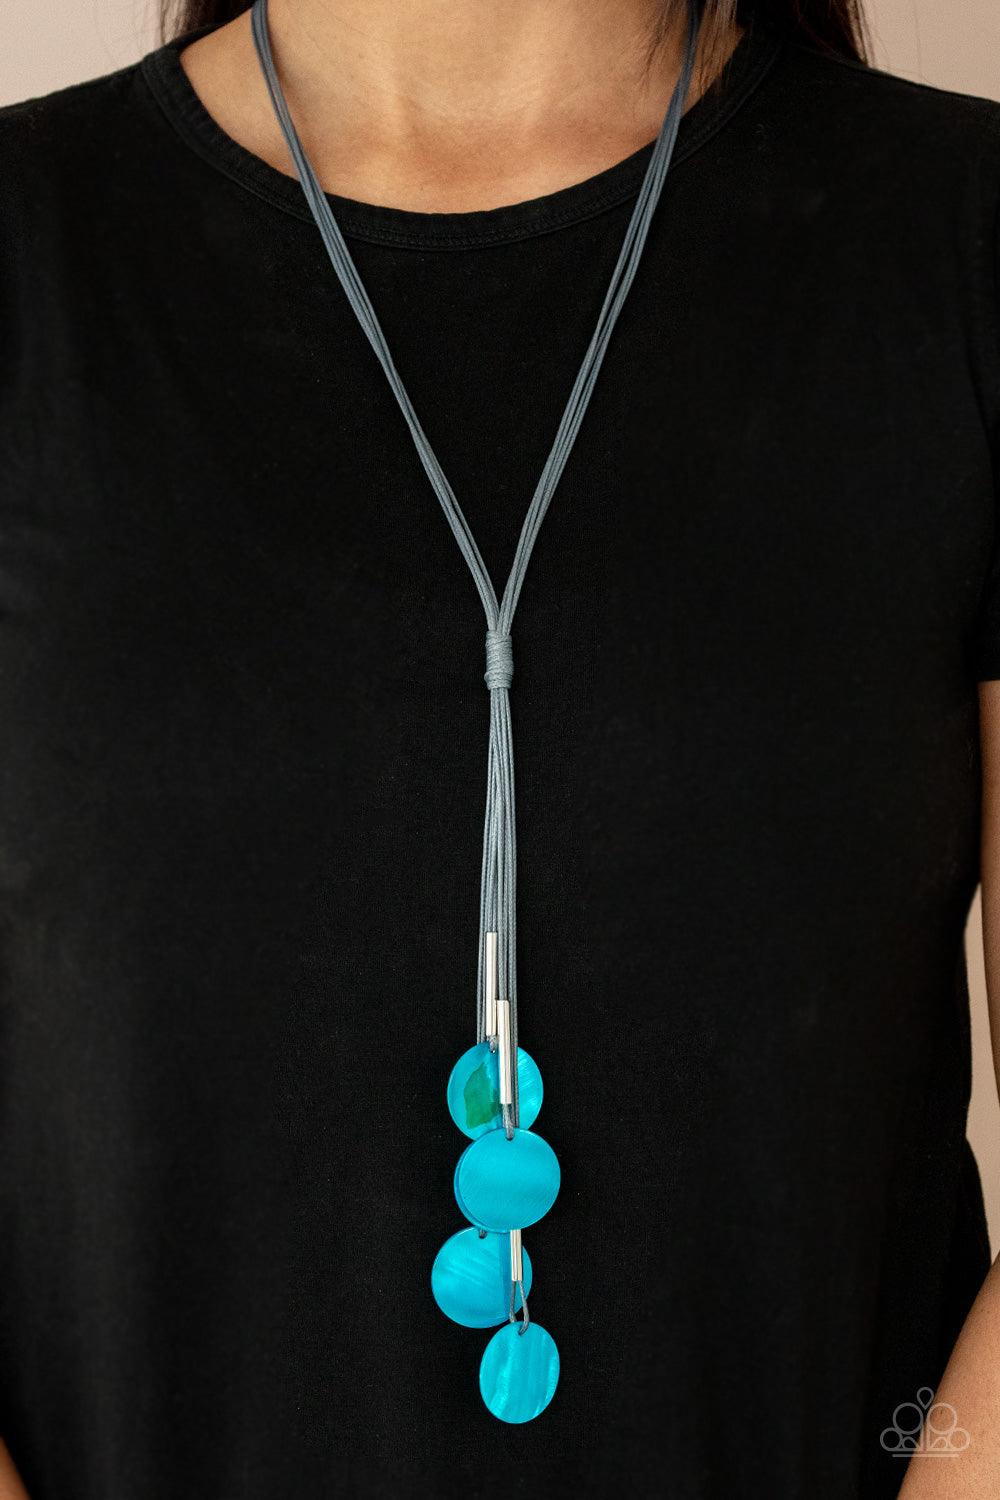 Paparazzi Accessories Tidal Tassels - Blue Featuring cylindrical silver accents, iridescent blue shell-like discs swing from the ends of knotted Ultimate Gray cords, creating a colorful tassel. Features an adjustable sliding knot closure. Sold as one indi